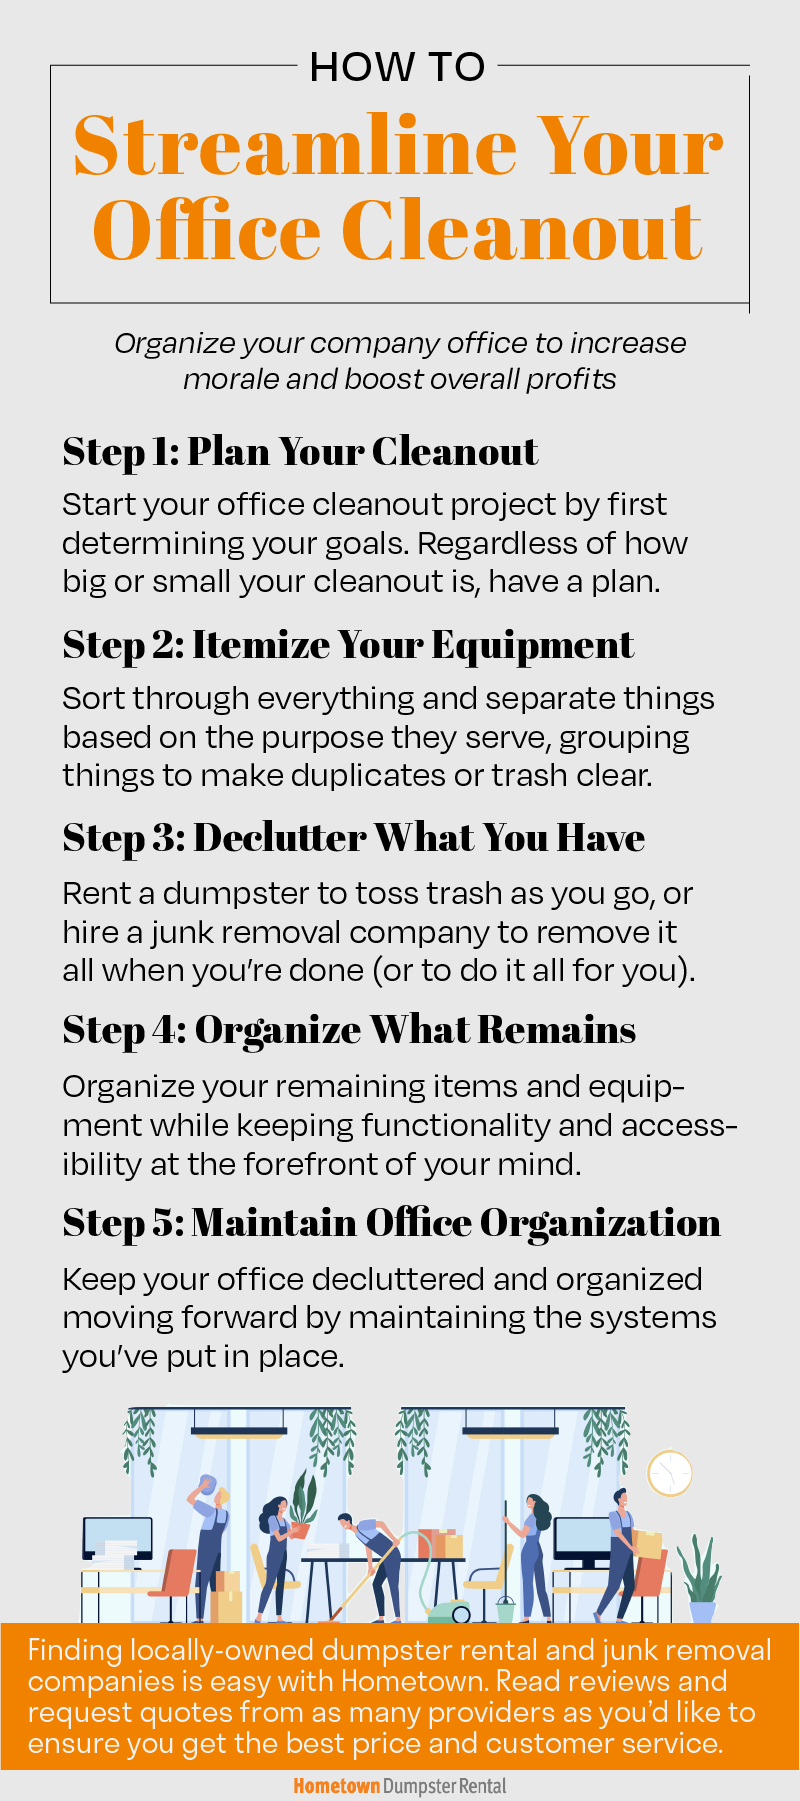 streamline office cleanout infographic